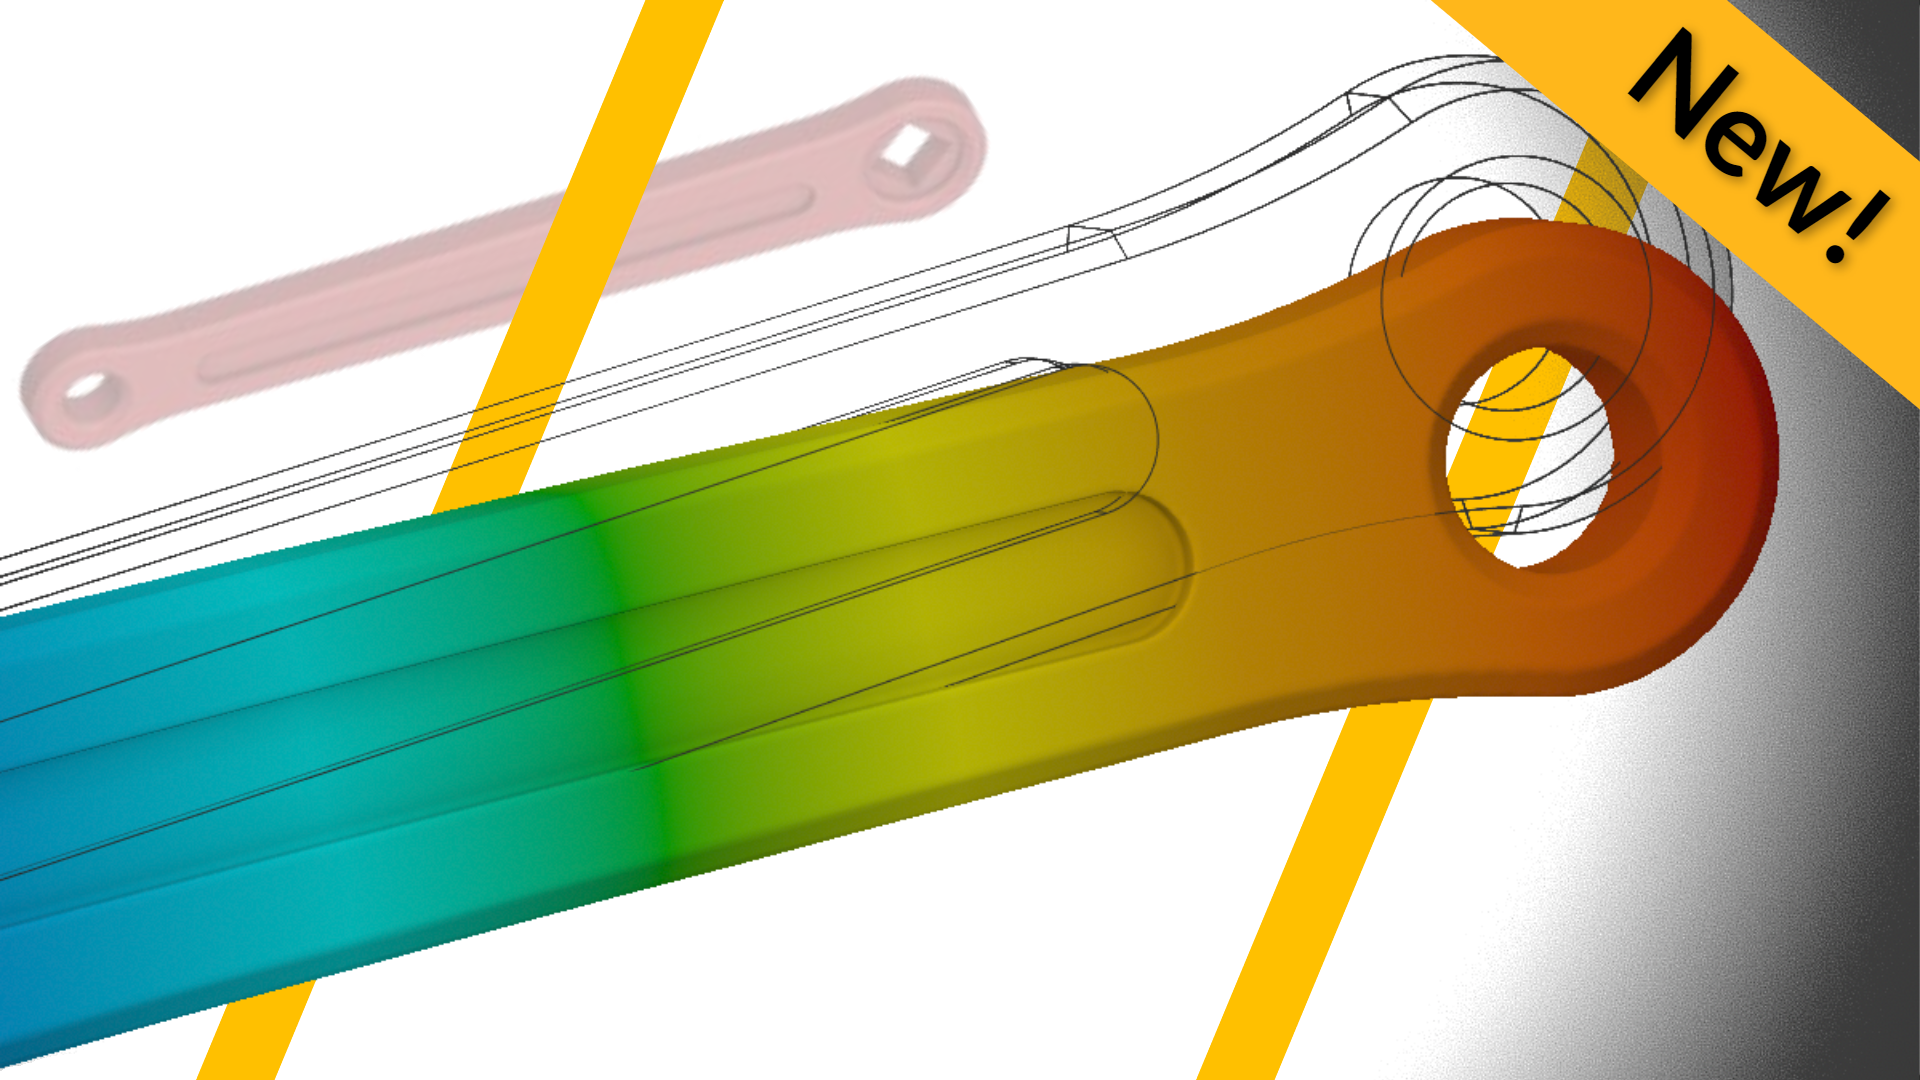 Bike Crank Design - Ansys Discovery